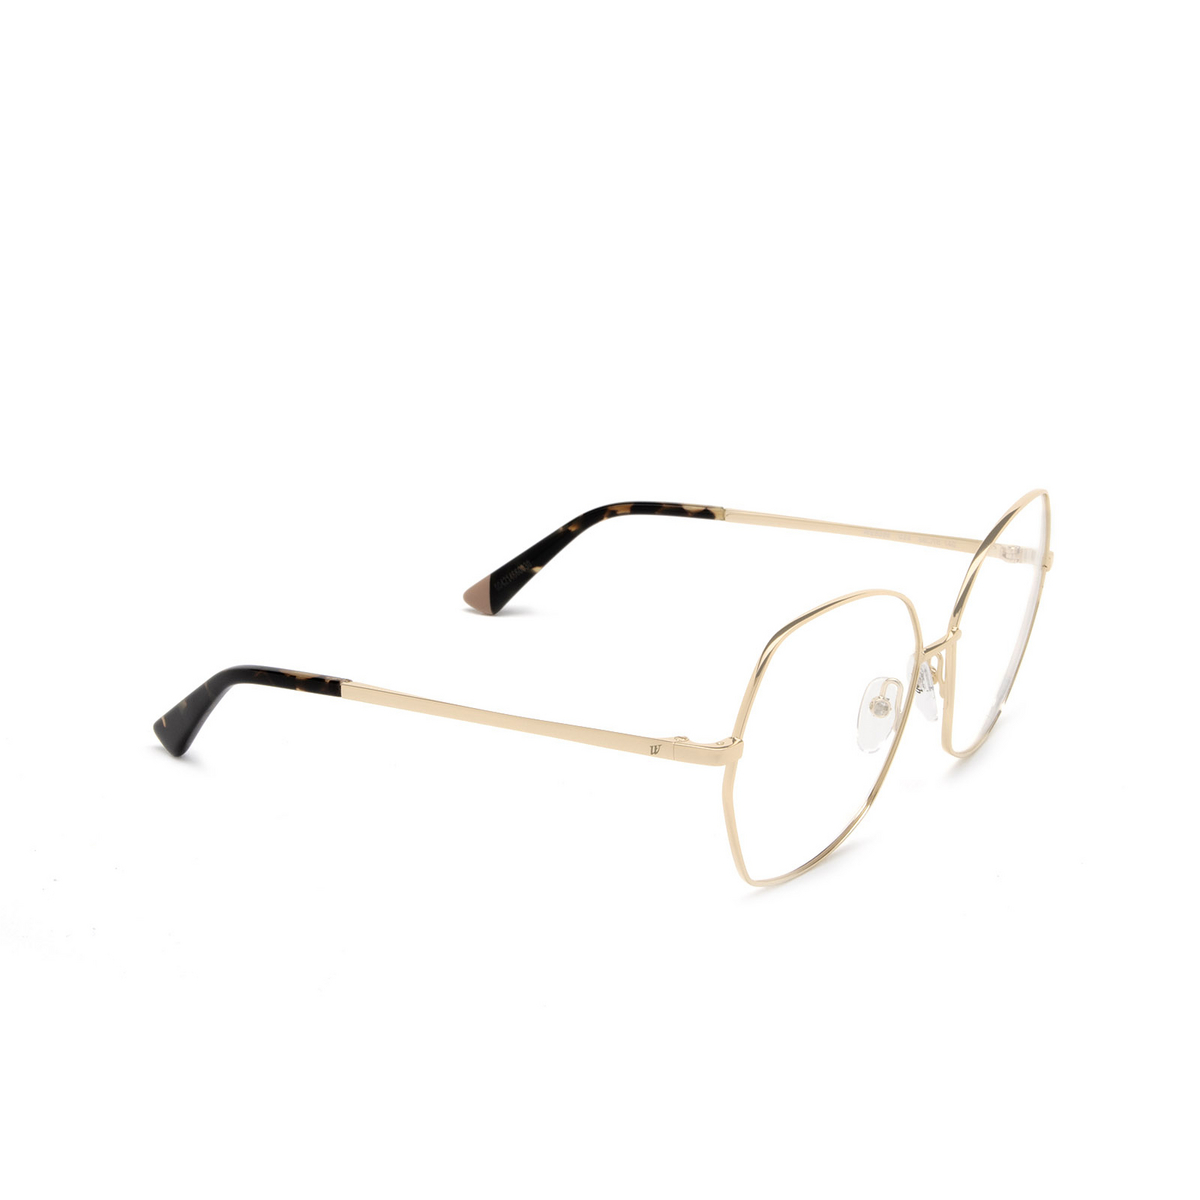 Web® Butterfly Eyeglasses: WE5366 color 033 Gold - three-quarters view